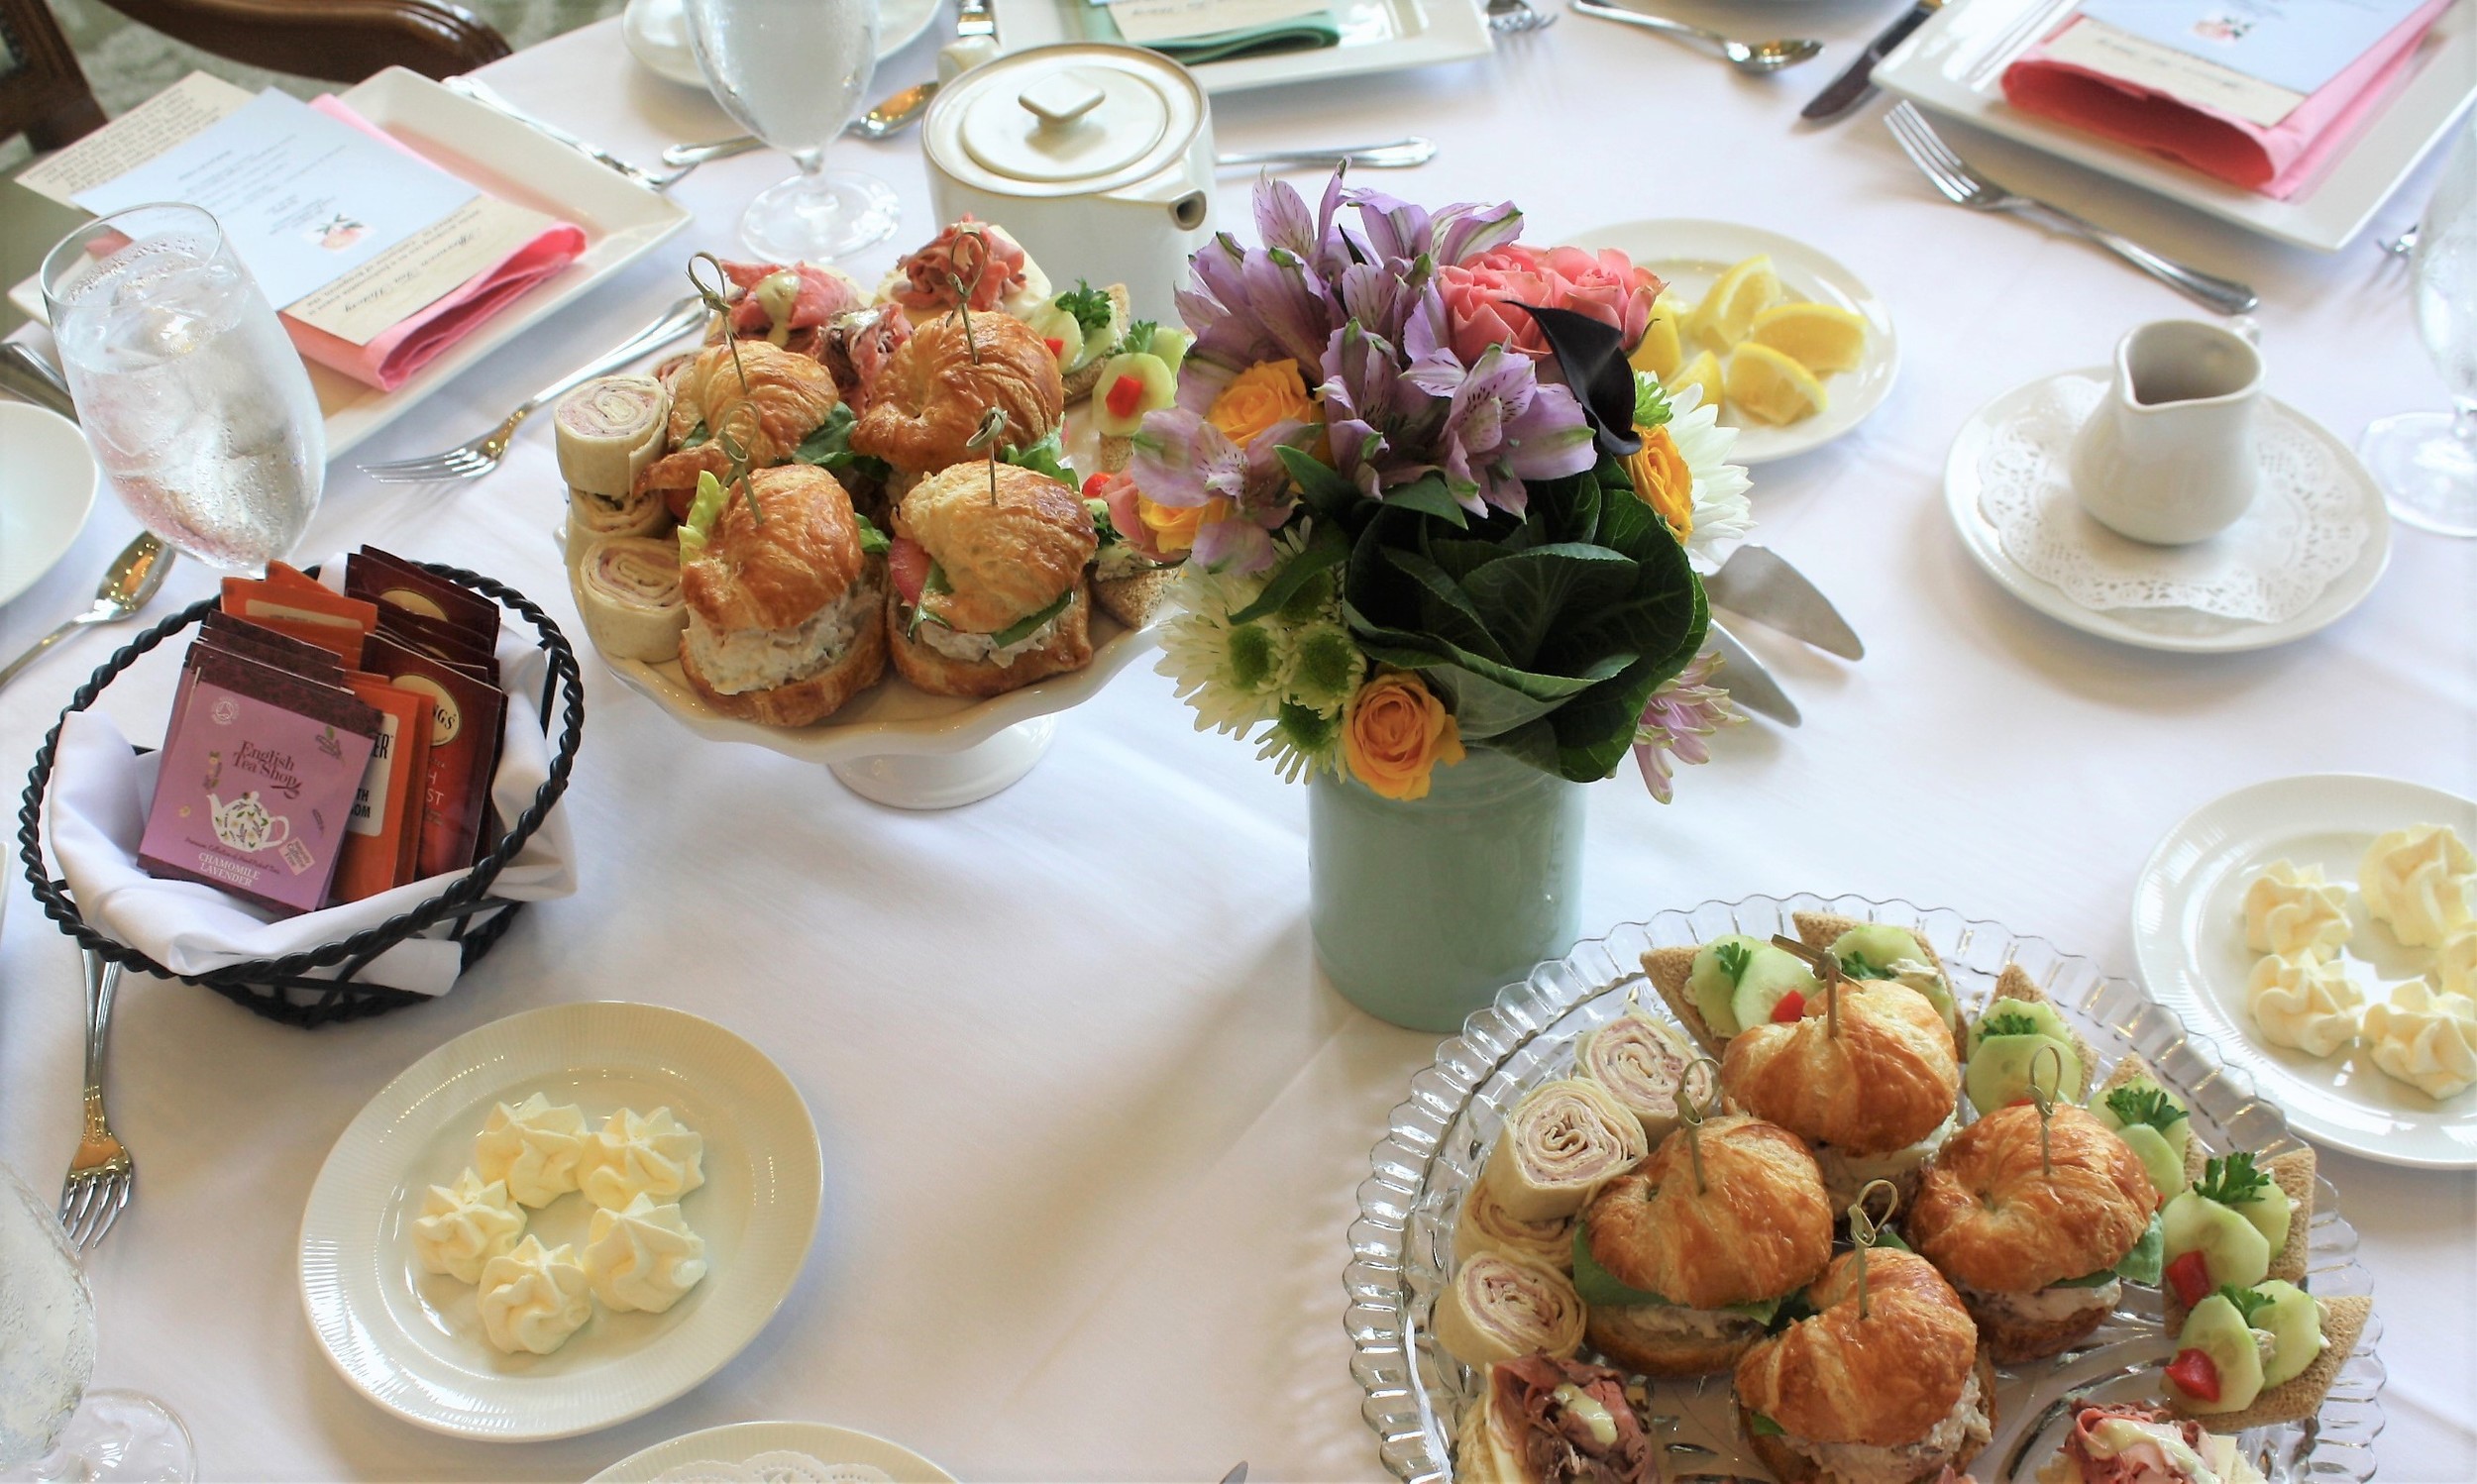 The Nemours Fund for Children's Health Women's Committee hosted a tea party July 28 in Ponte Vedra Beach in support of Nemours Children's Specialty Care.